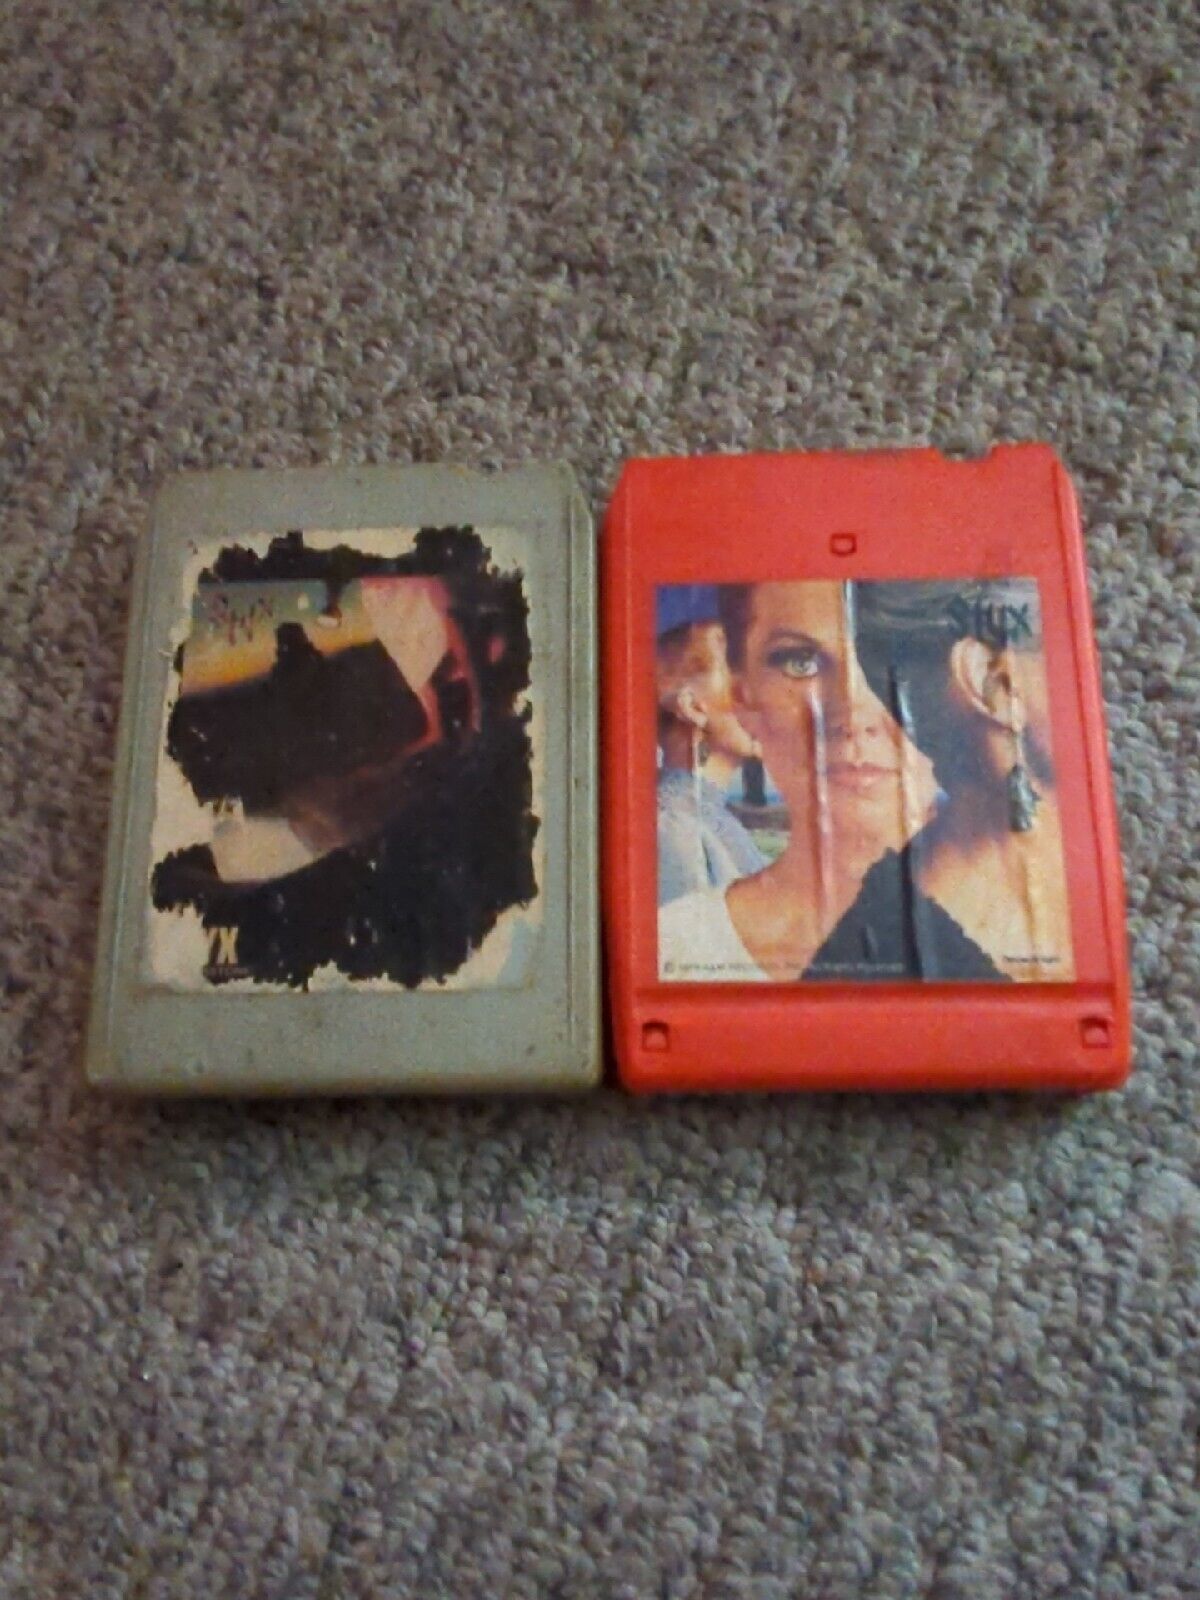 Styx Pieces Of Eight & Cornerstone 8 Track Tapes